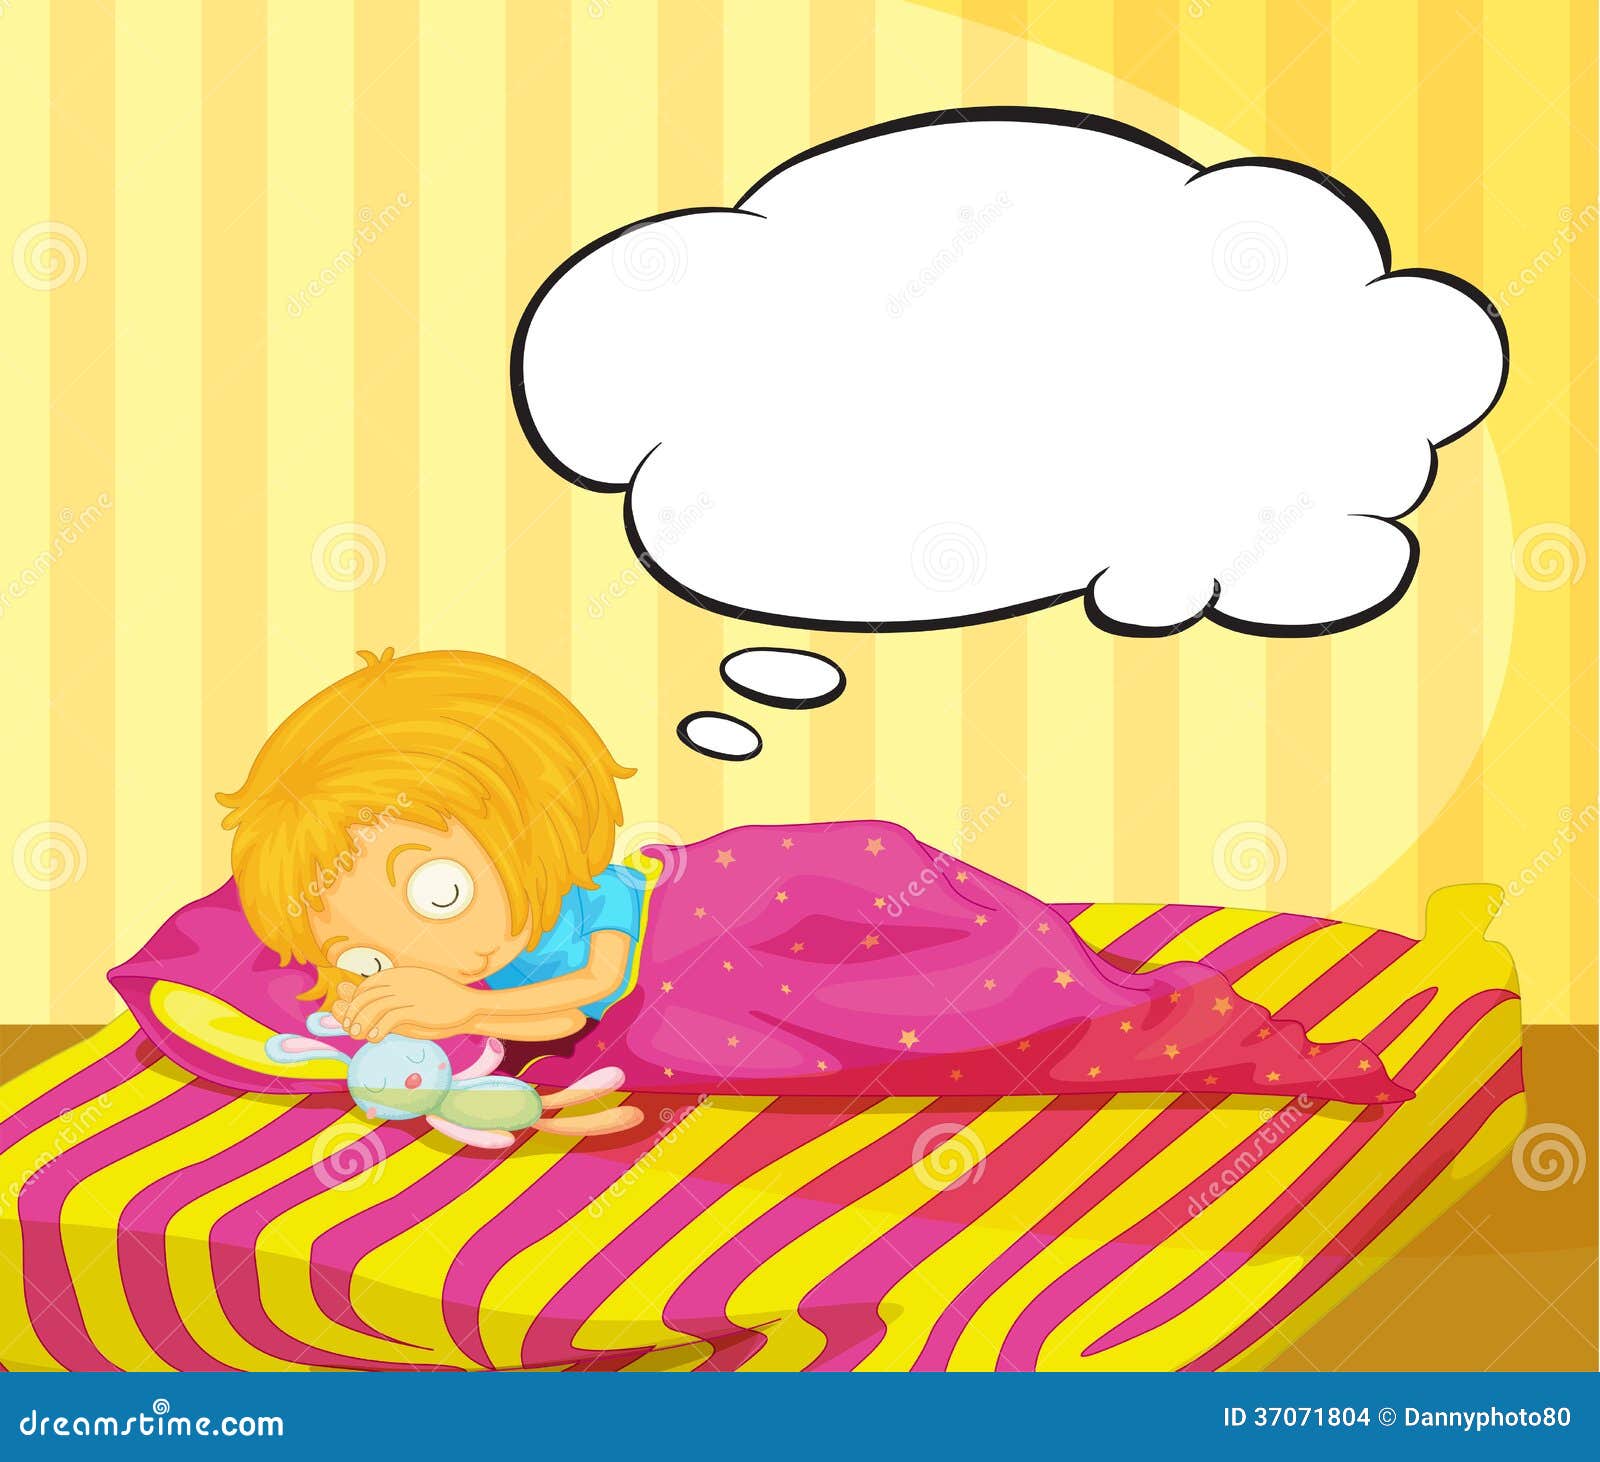 A young girl dreaming stock illustration. Illustration of dream - 37071804